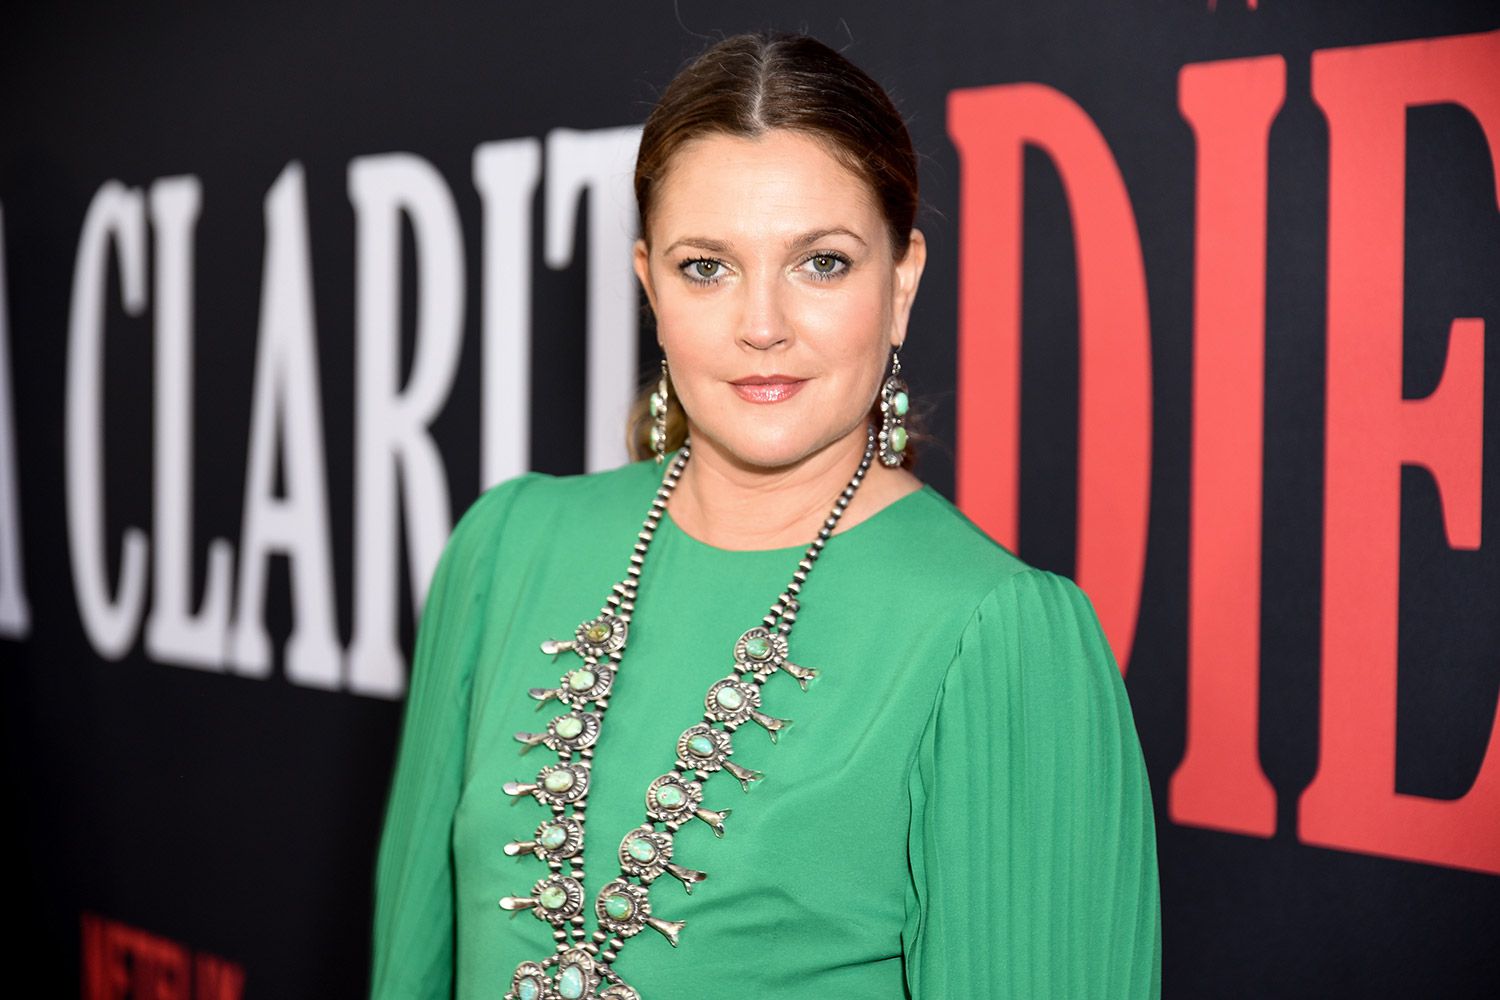 Drew Barrymore wearing a green dress together with big earrings and necklace